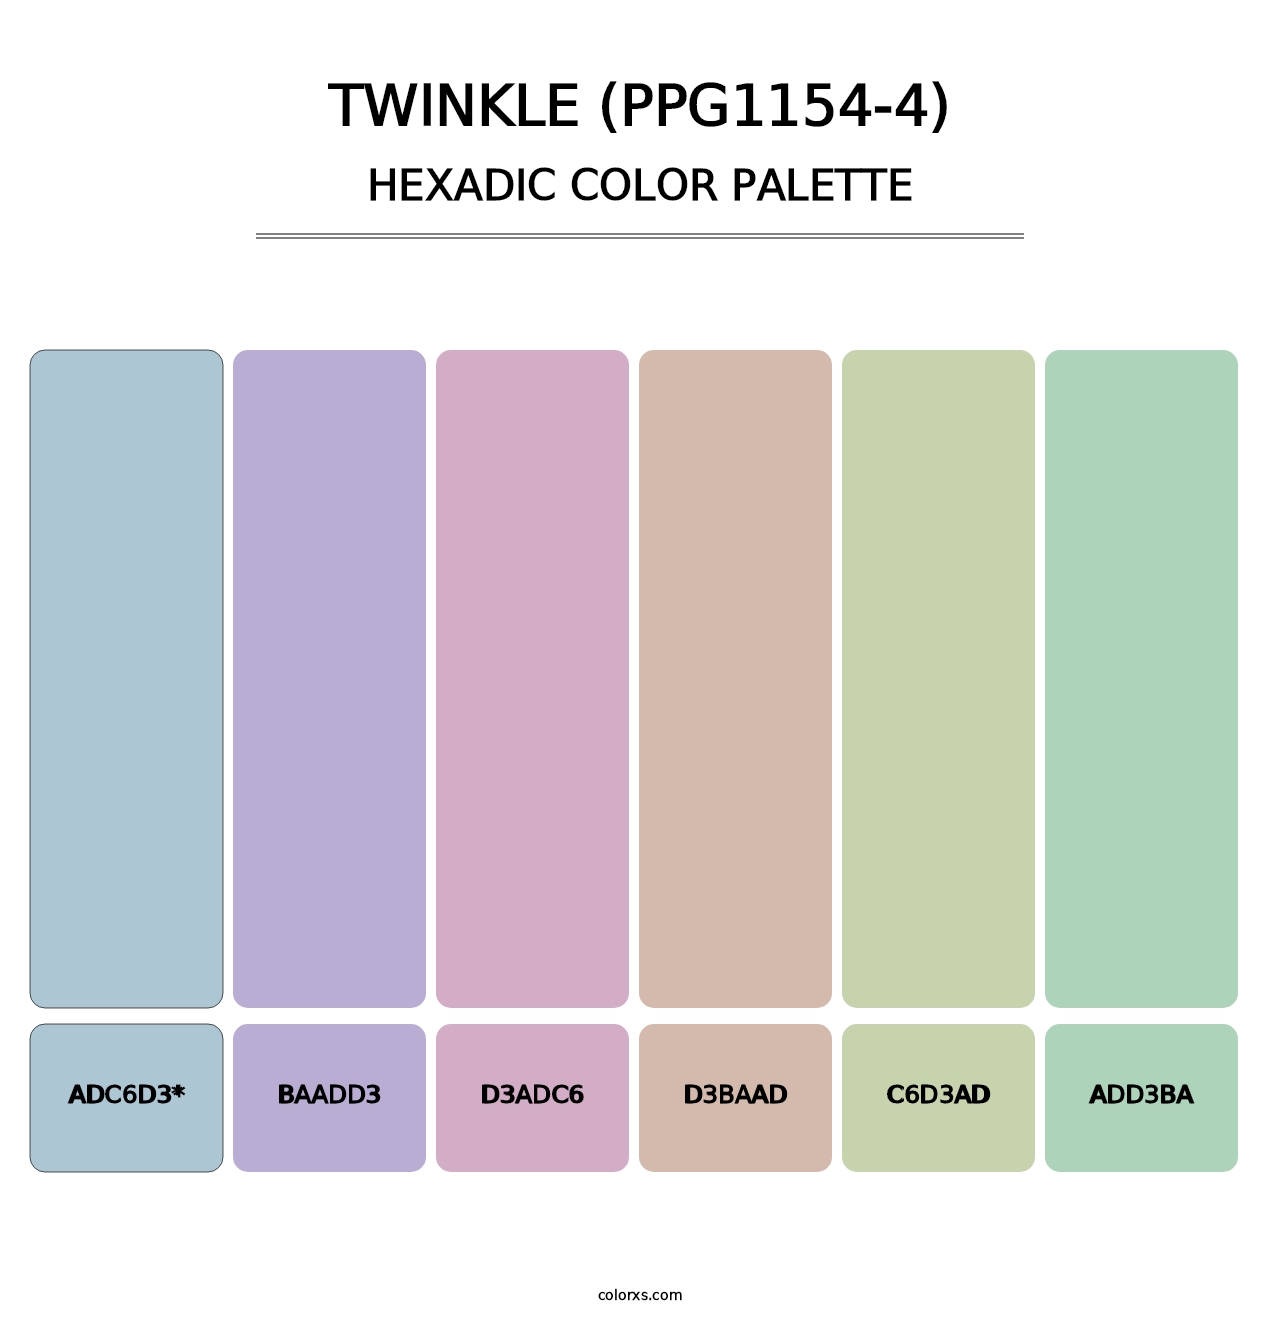 Twinkle (PPG1154-4) - Hexadic Color Palette